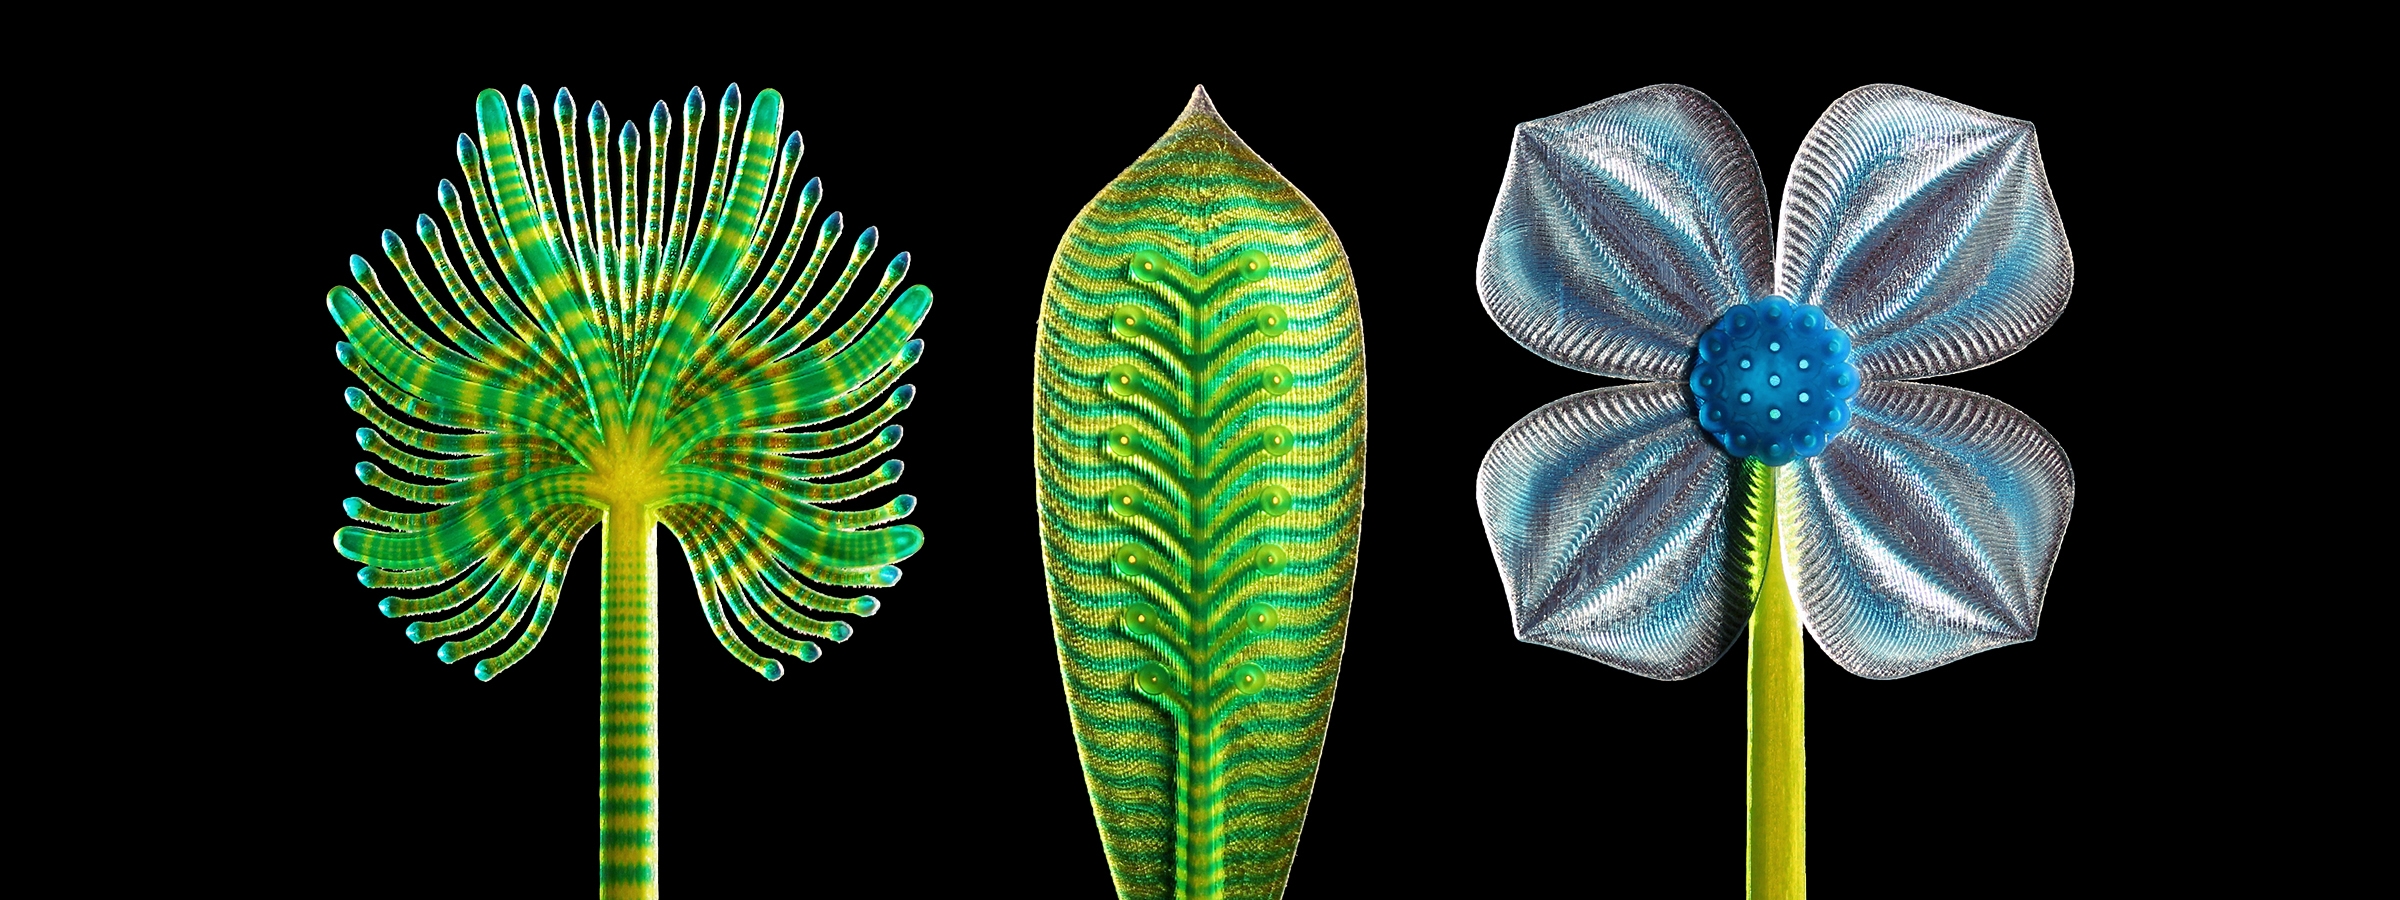 Three surreal plant-like 3D prints with microscopic textures.